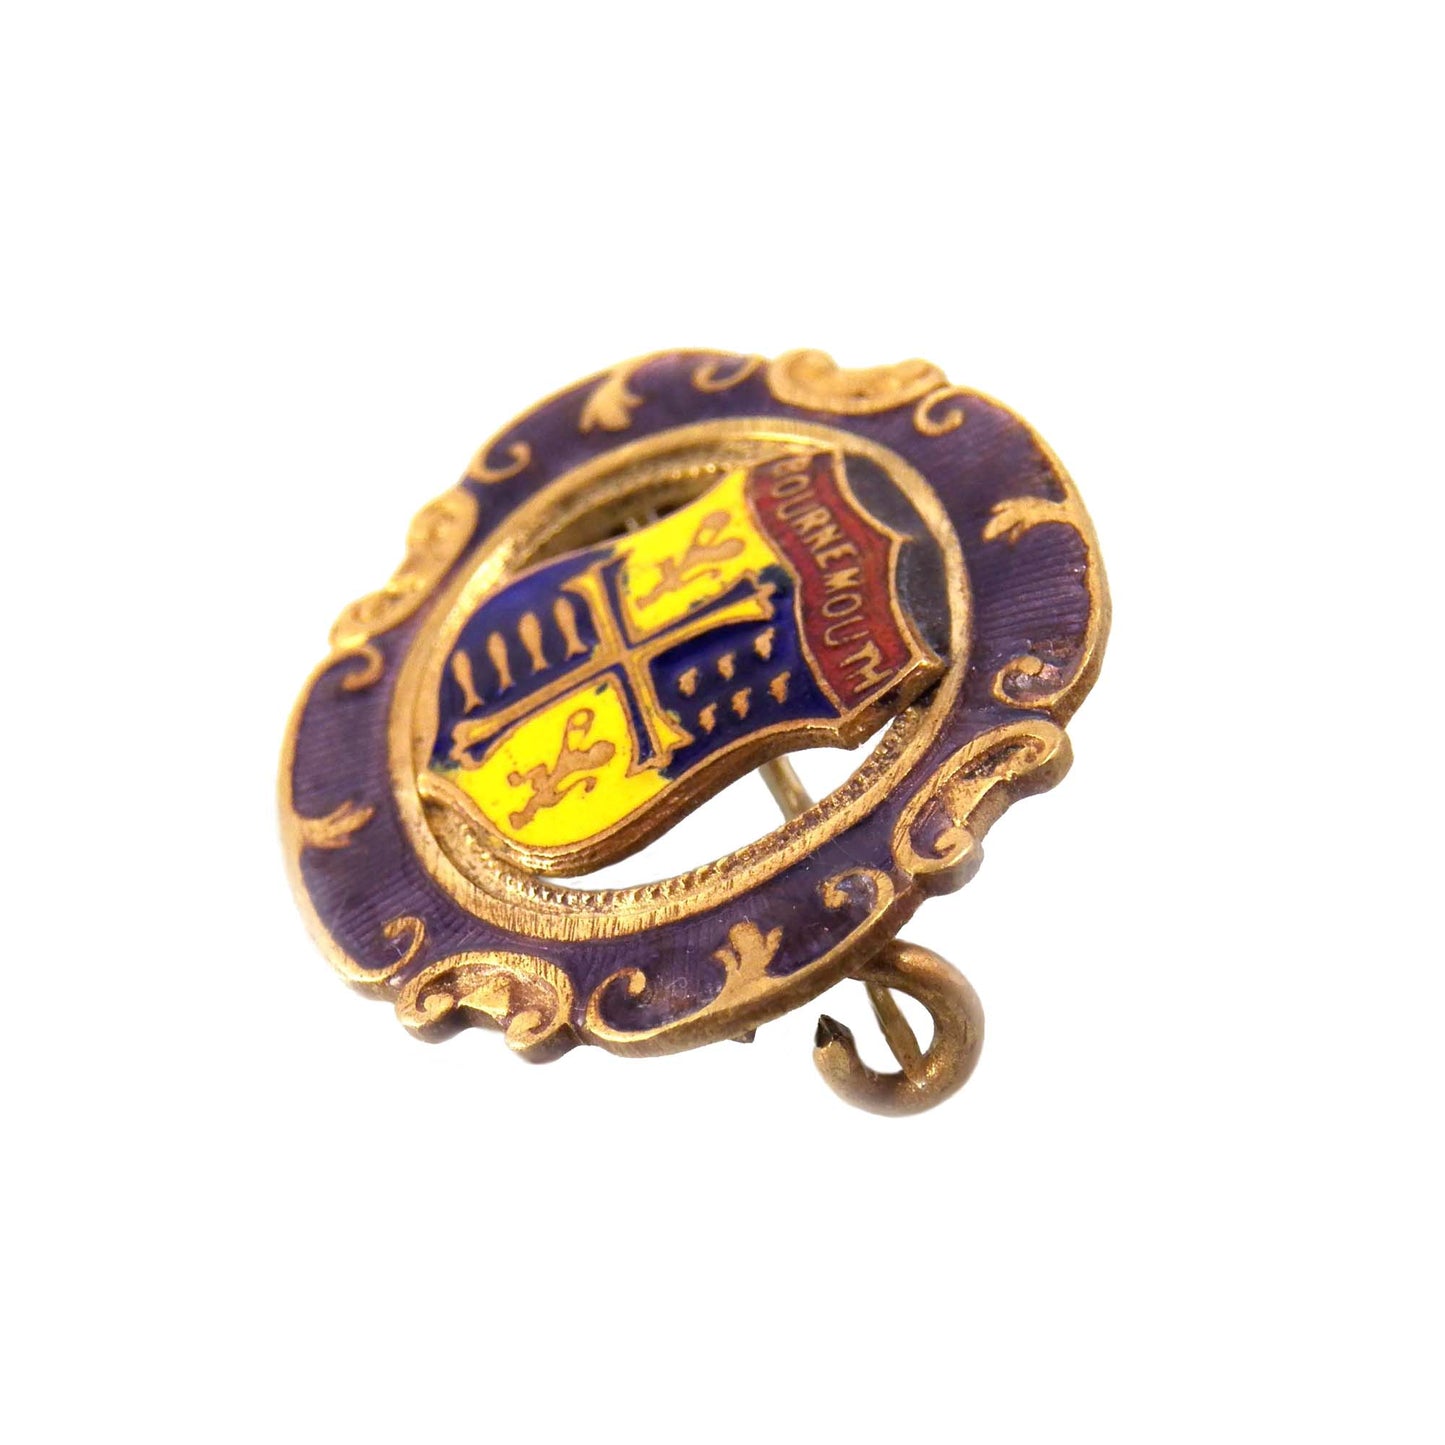 Antique Guilloche Enamel Brooch, Bournemouth Coat of Arm Pin, English Victorian Travel Jewelry